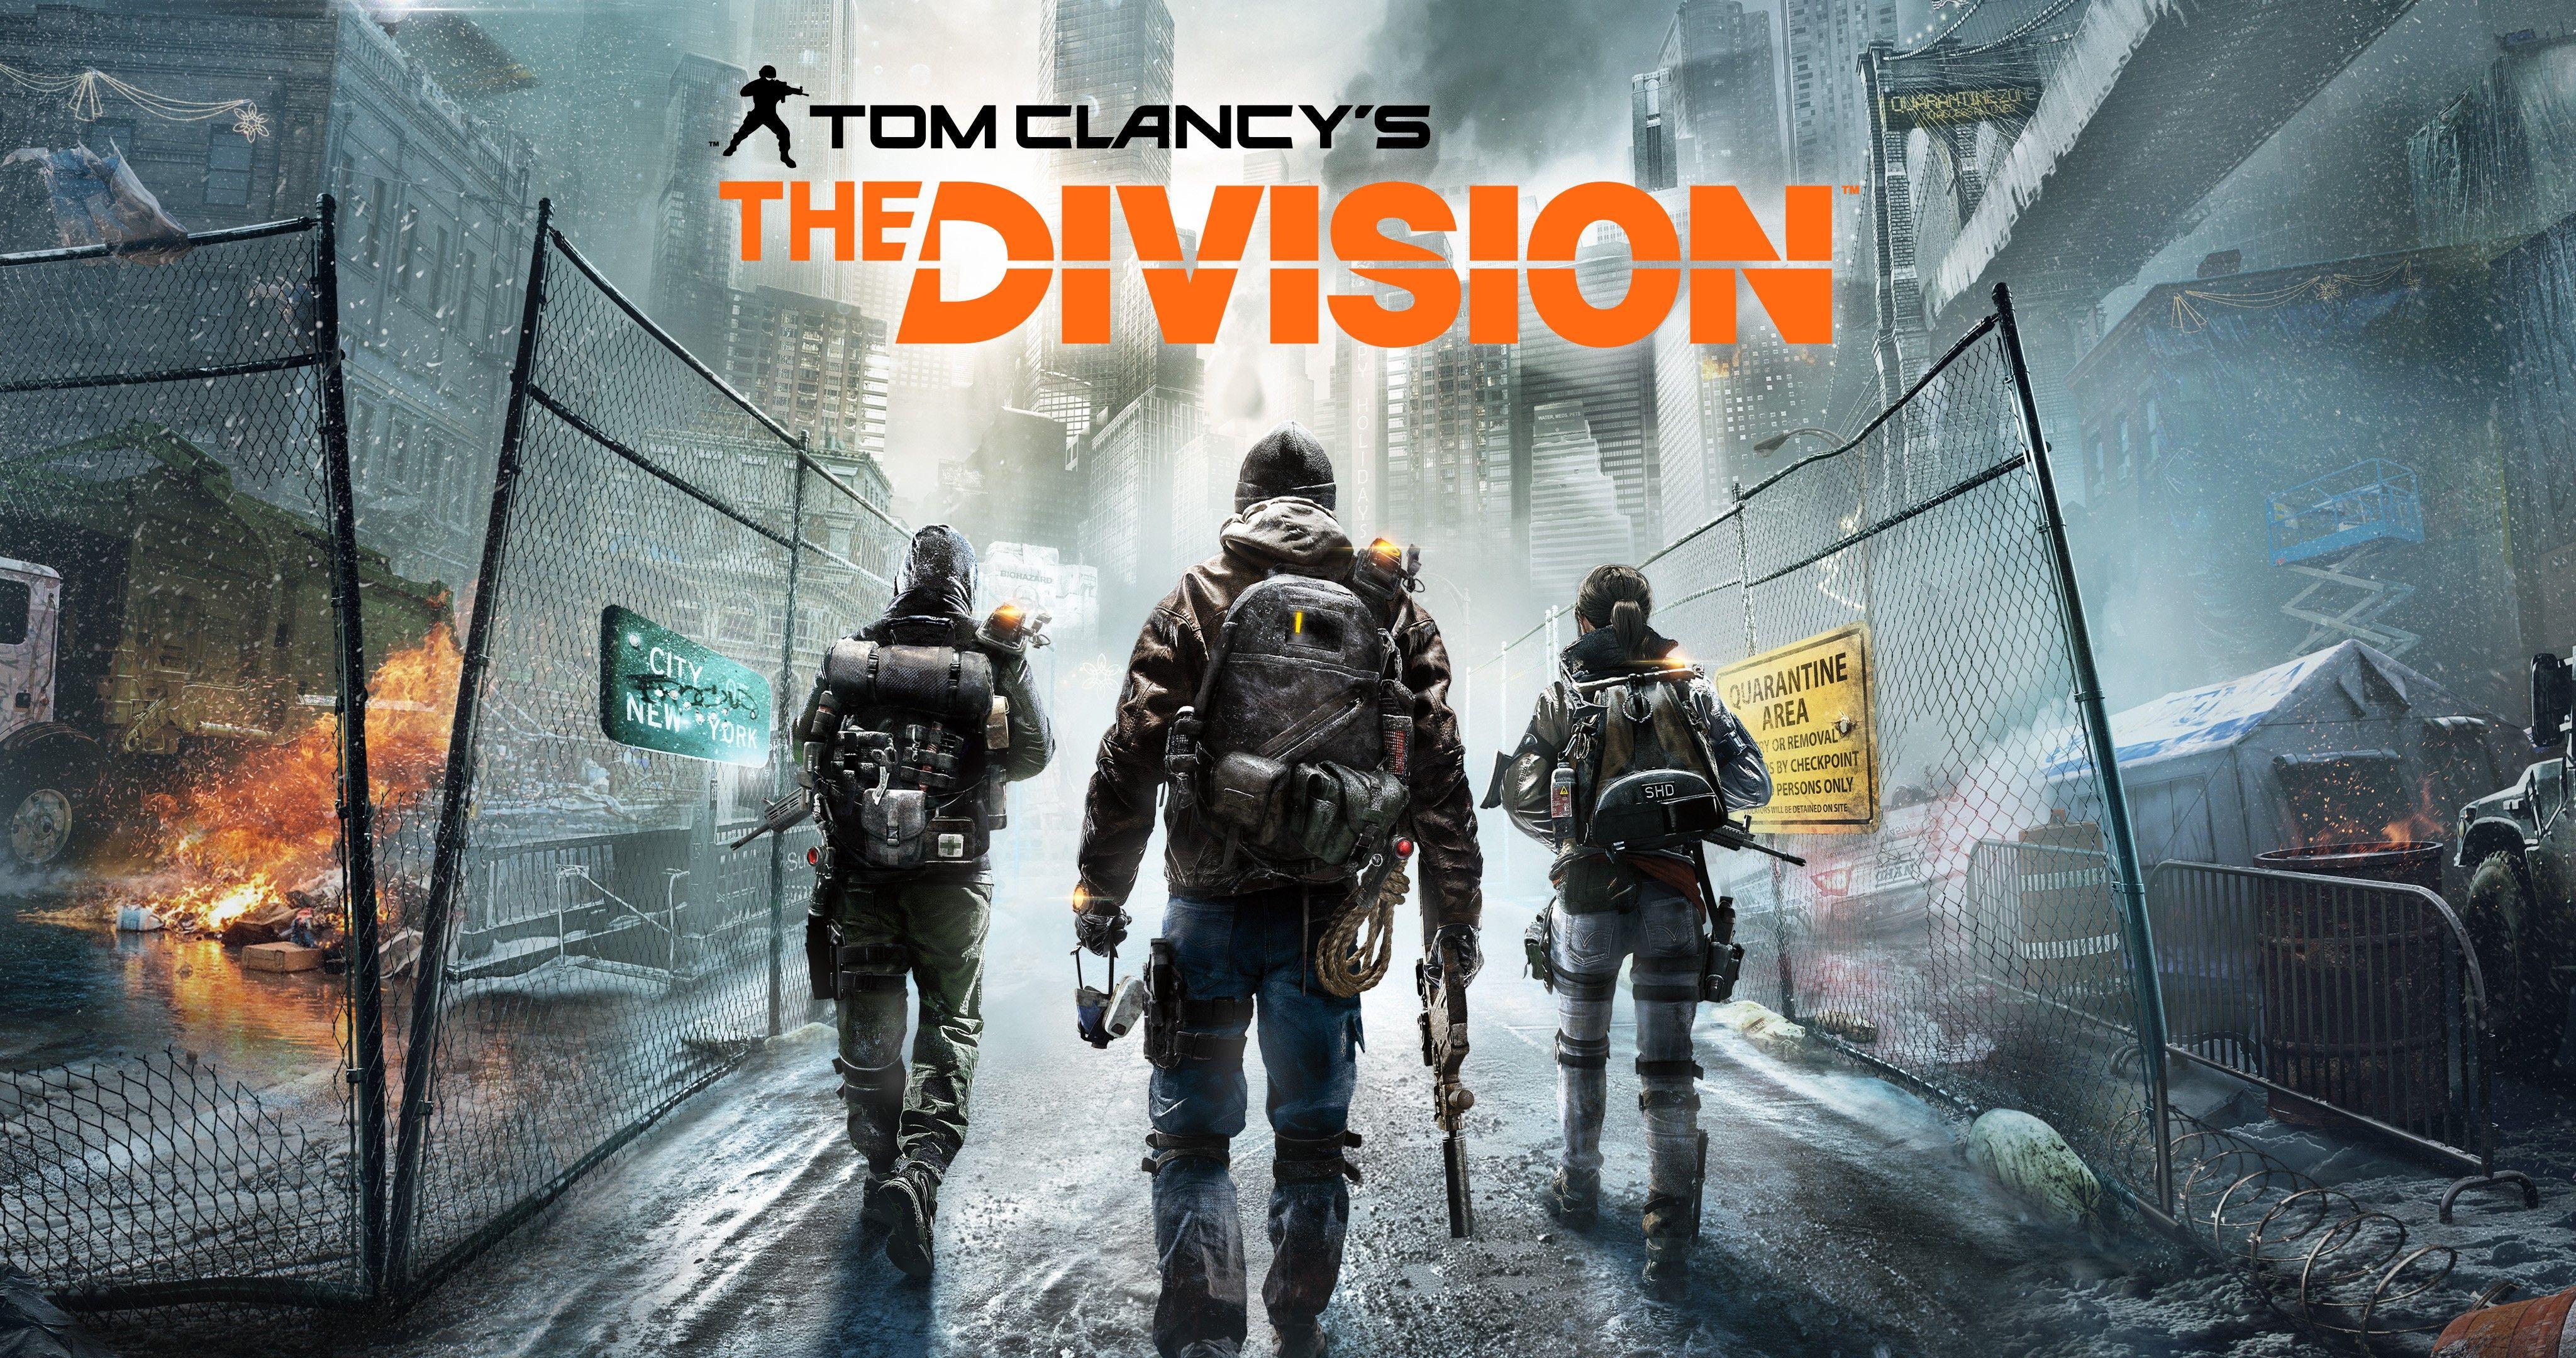 The Division 4K Wallpaper Free The Division 4K Background